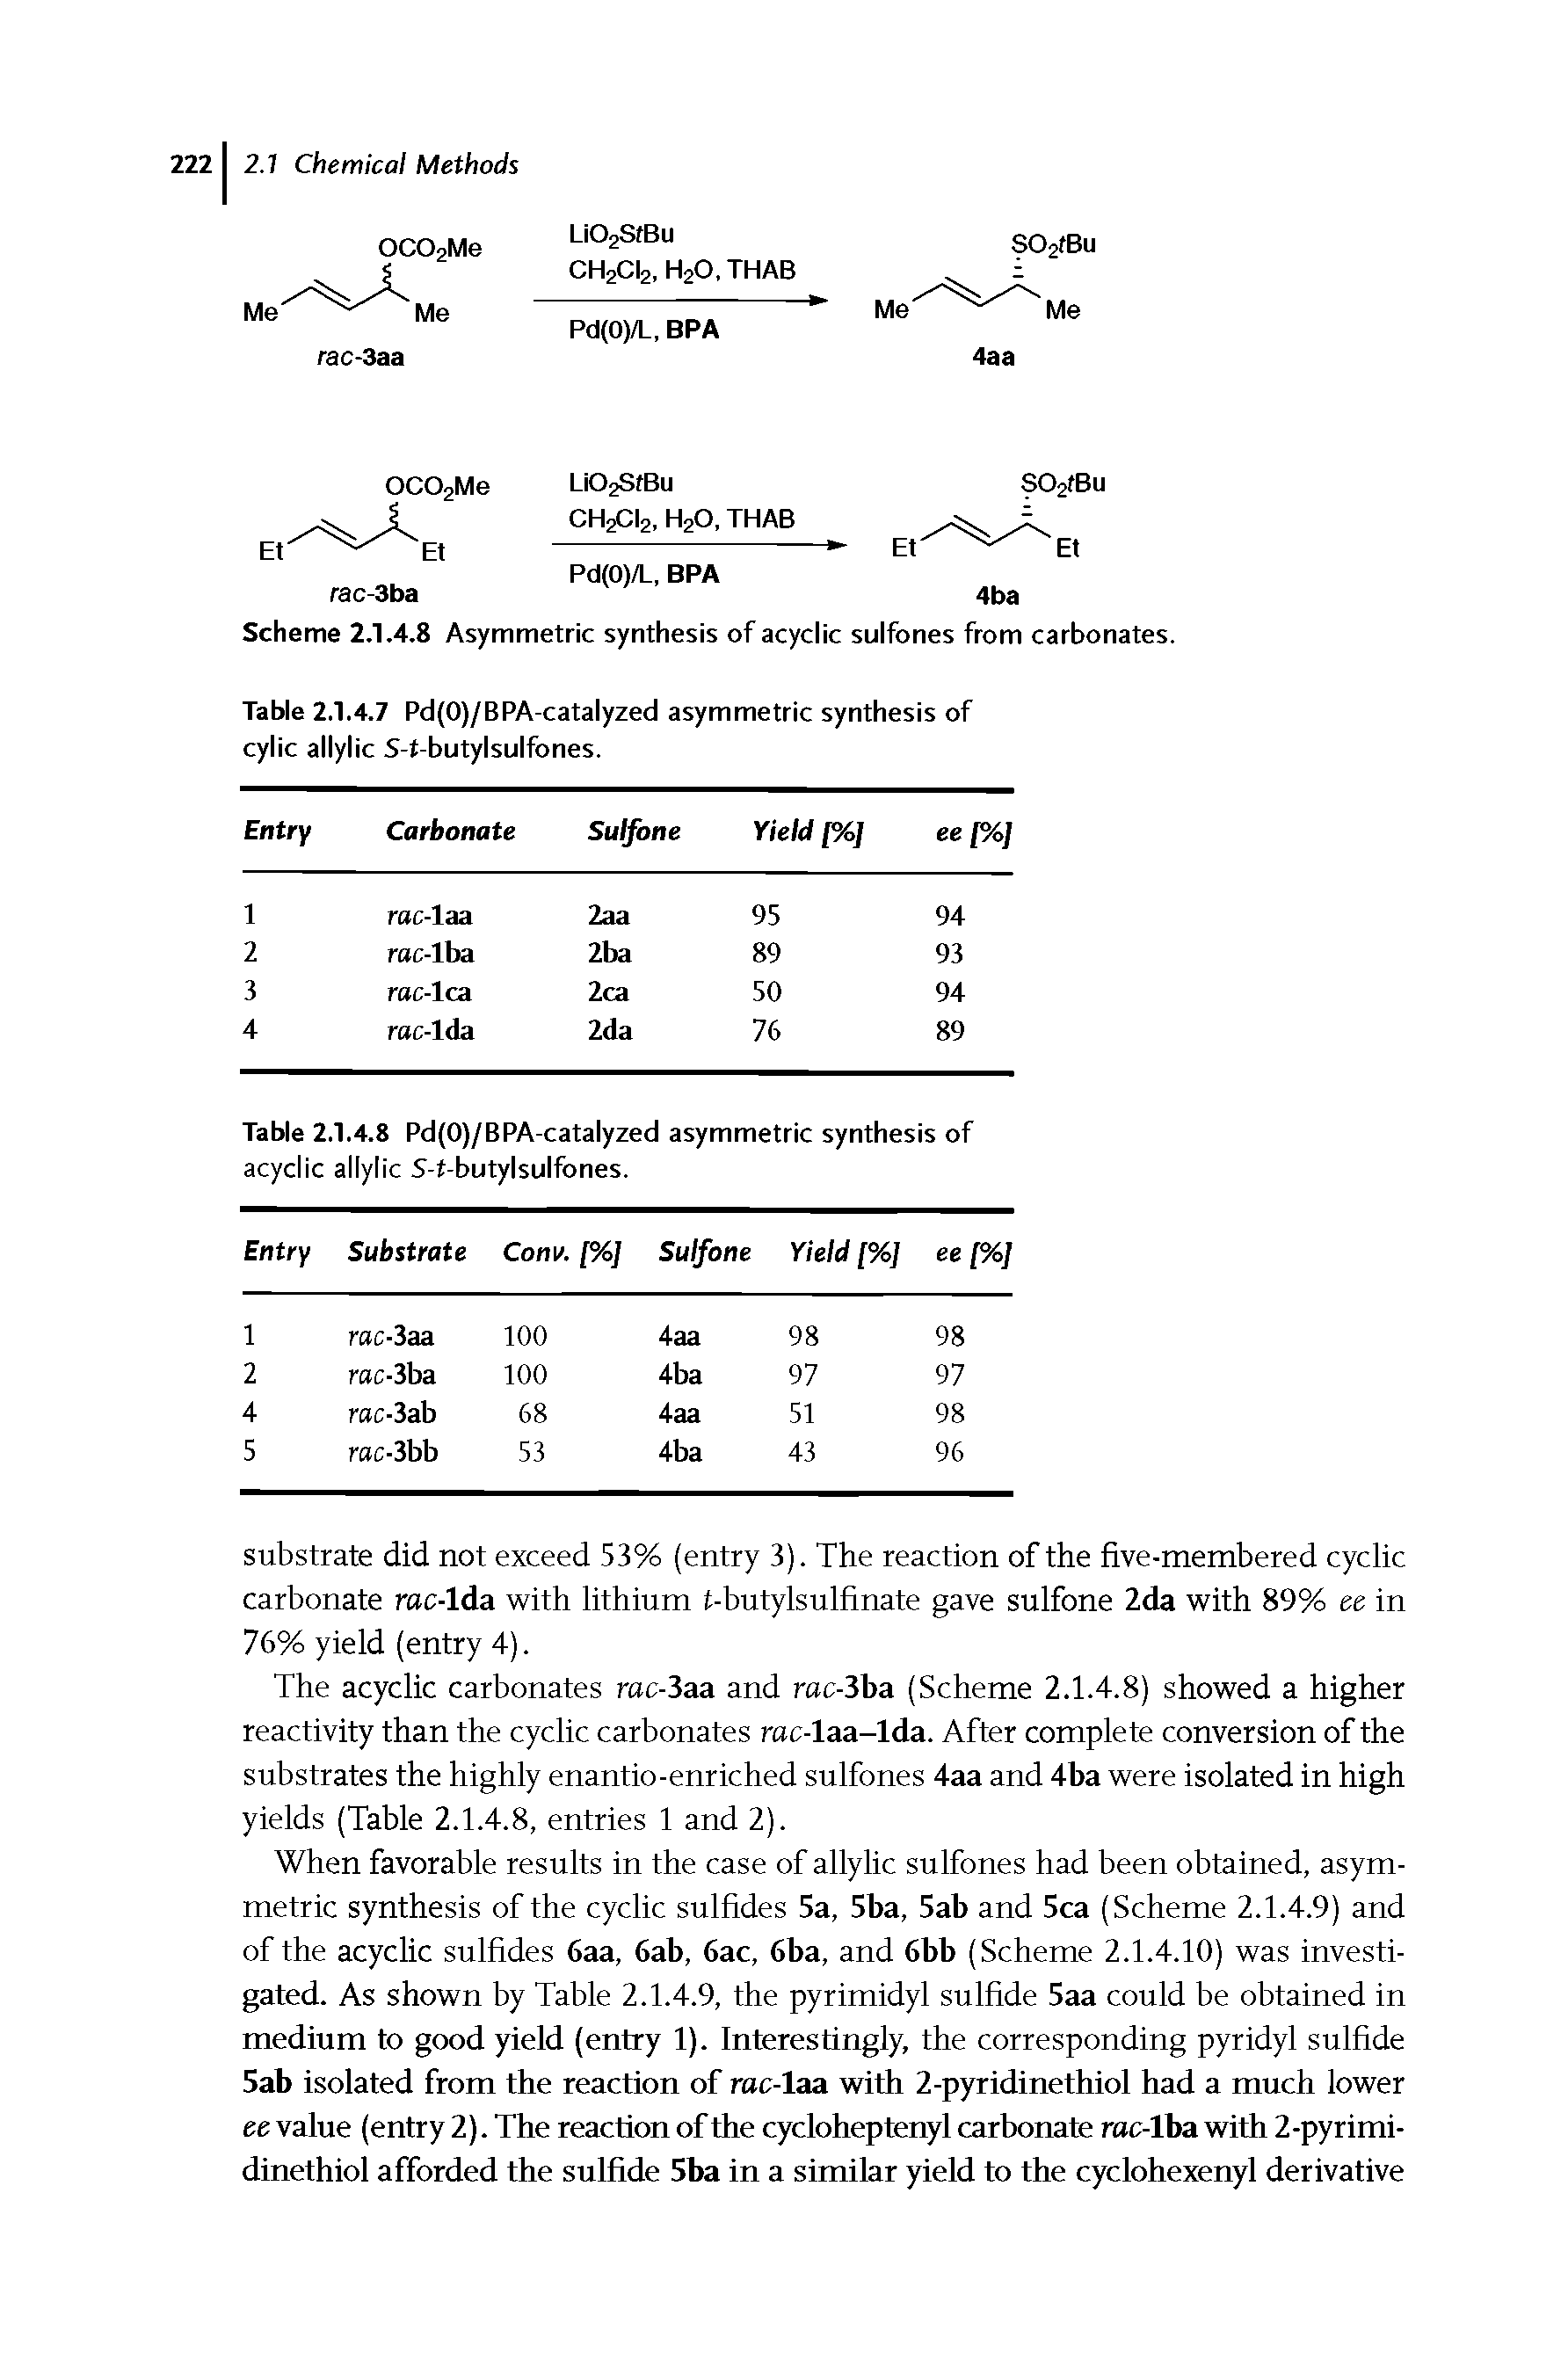 Table 2.1.4.7 Pd(0)/BPA-catalyzed asymmetric synthesis of cylic allylic S-t-butylsulfones.